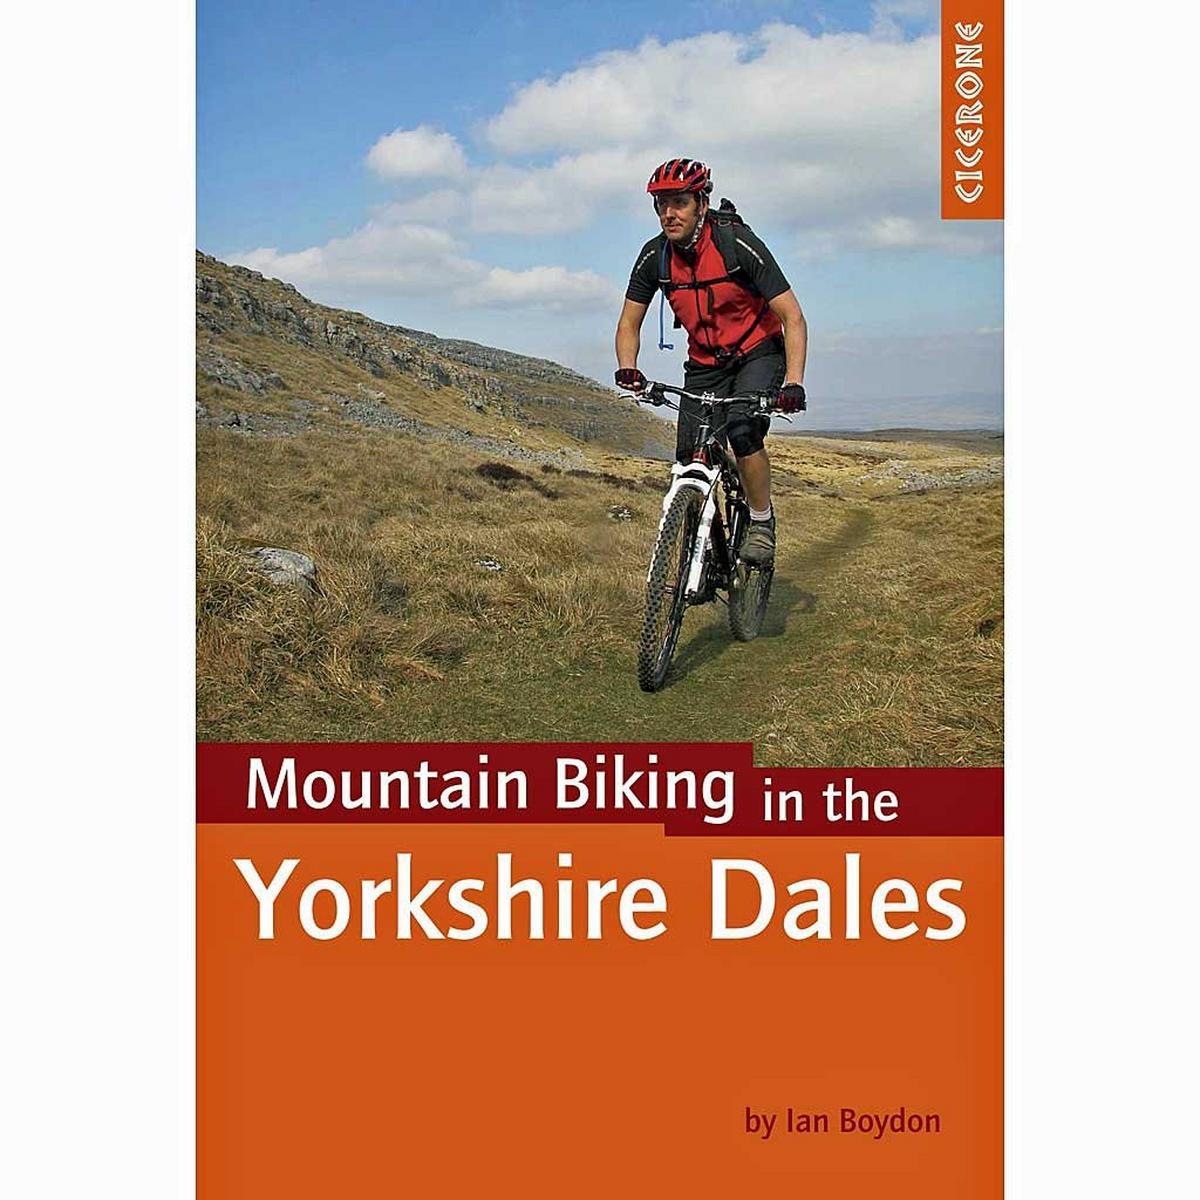 Cicerone Guide Book: Mountain Biking in the Yorkshire Dales